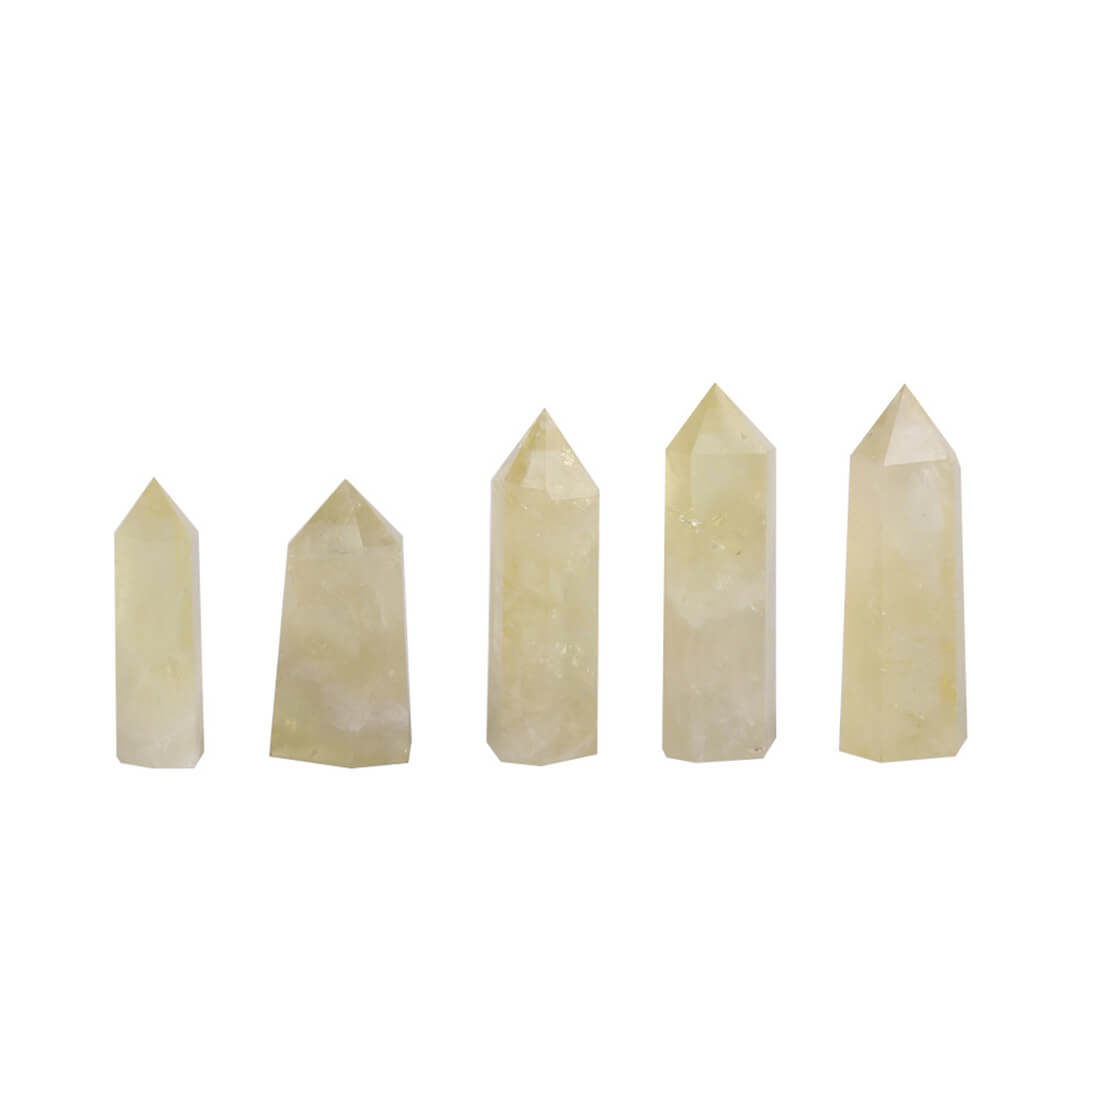 Citrine Crystal Towers - 5 to 9 cm